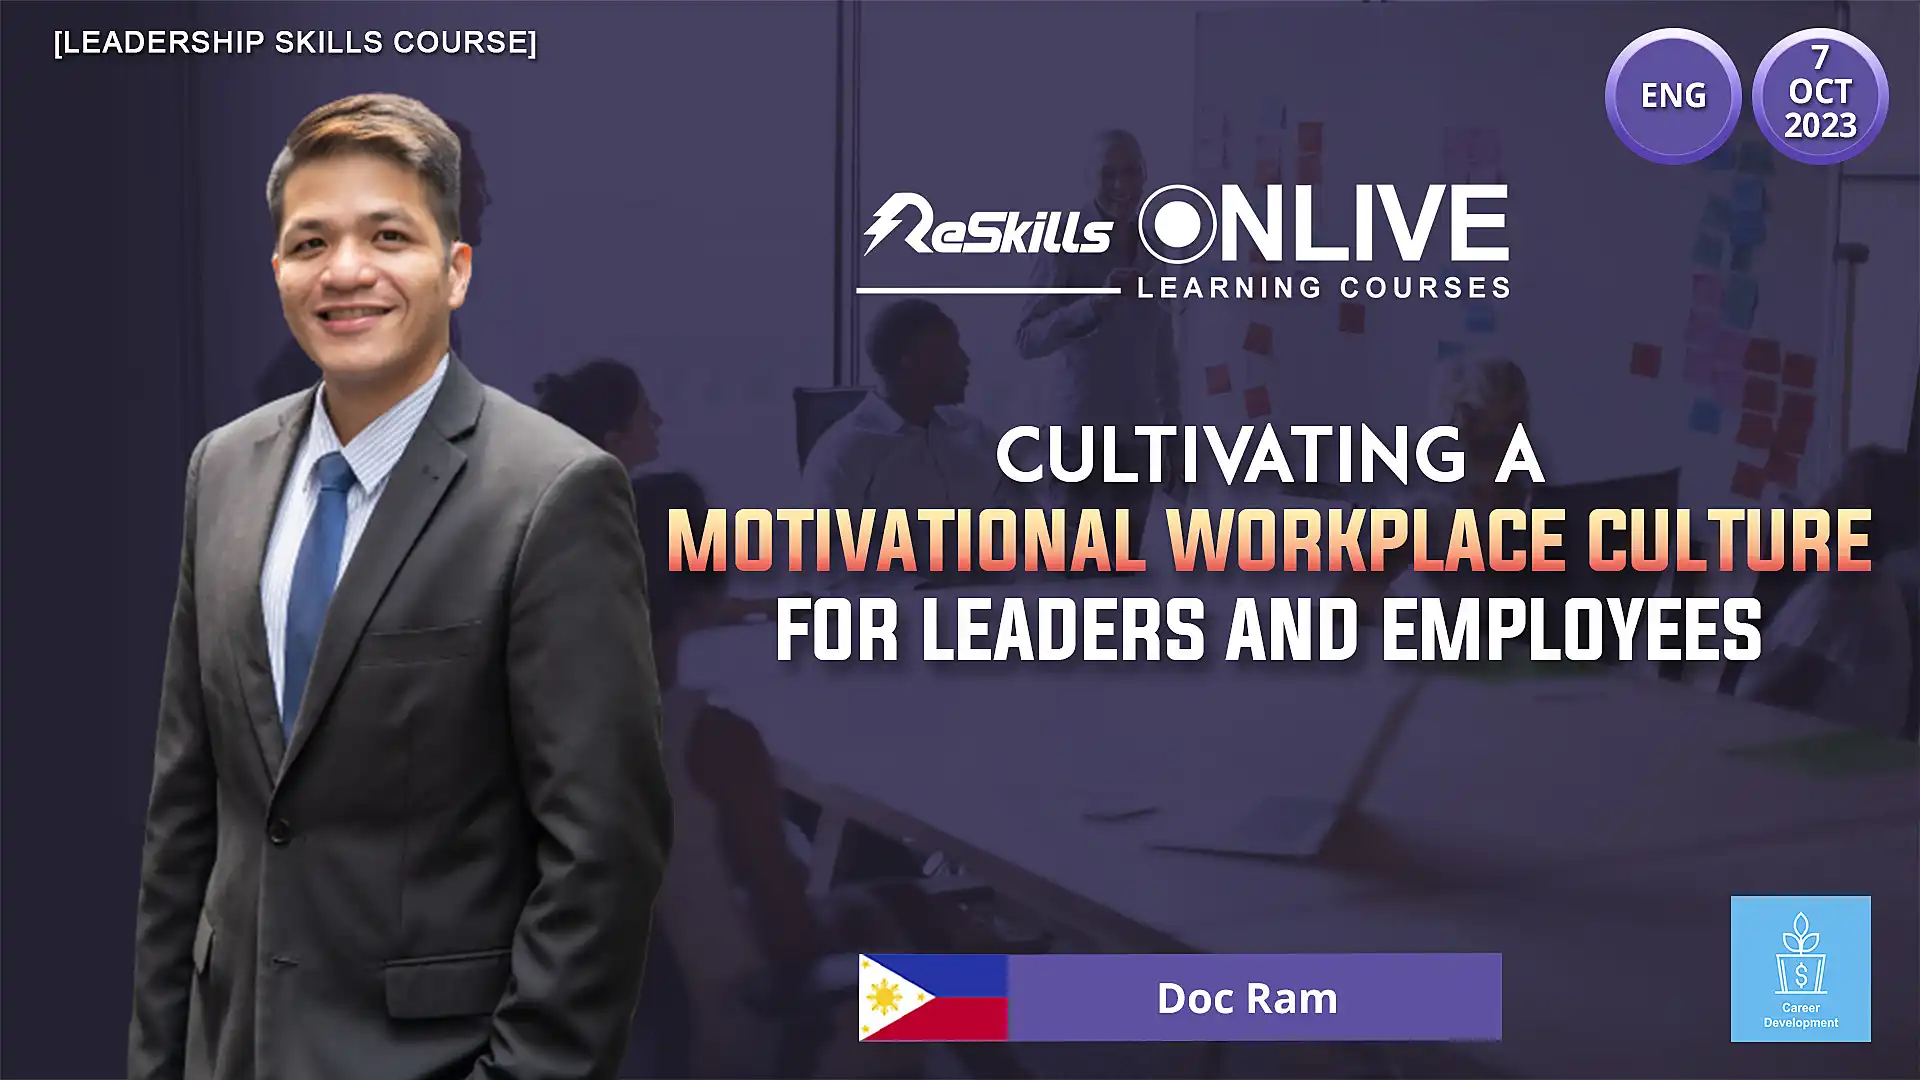 [Leadership Skills Course] Cultivating a Motivational Workplace Culture for Leaders and Employees - ReSkills